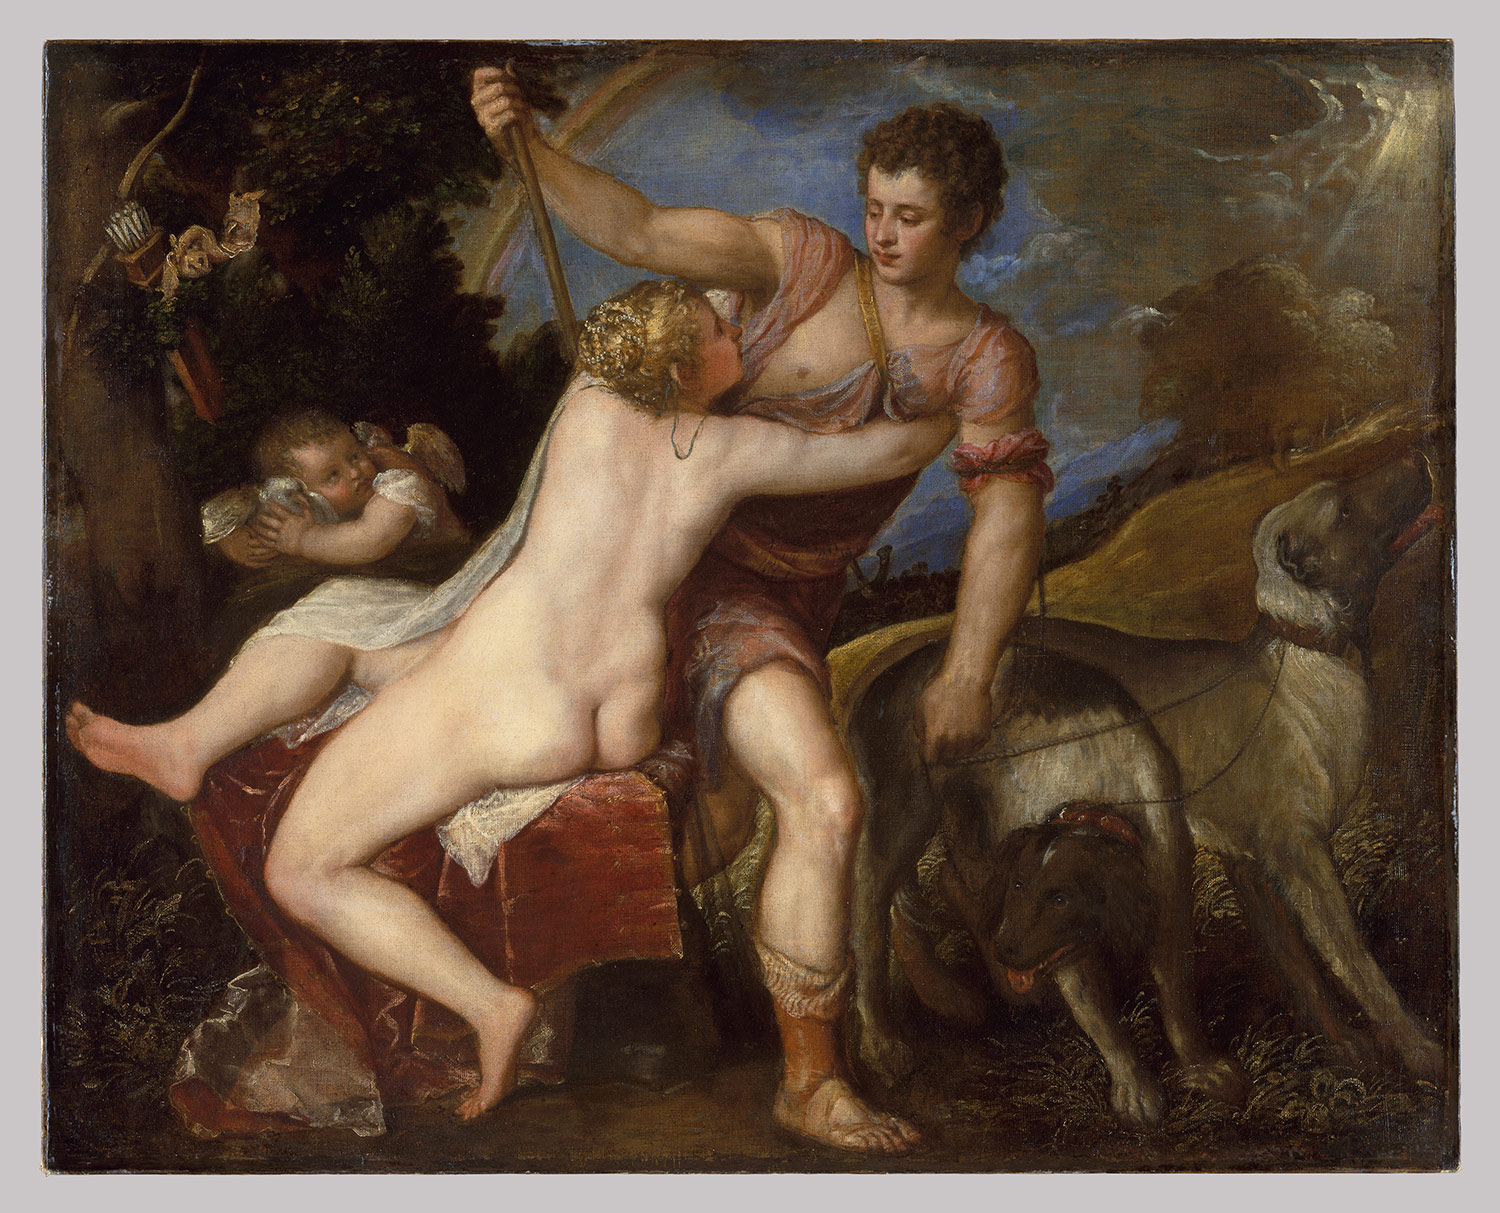 Ovid, in his Metamorphoses, relates the story of the goddess Venus vainly 